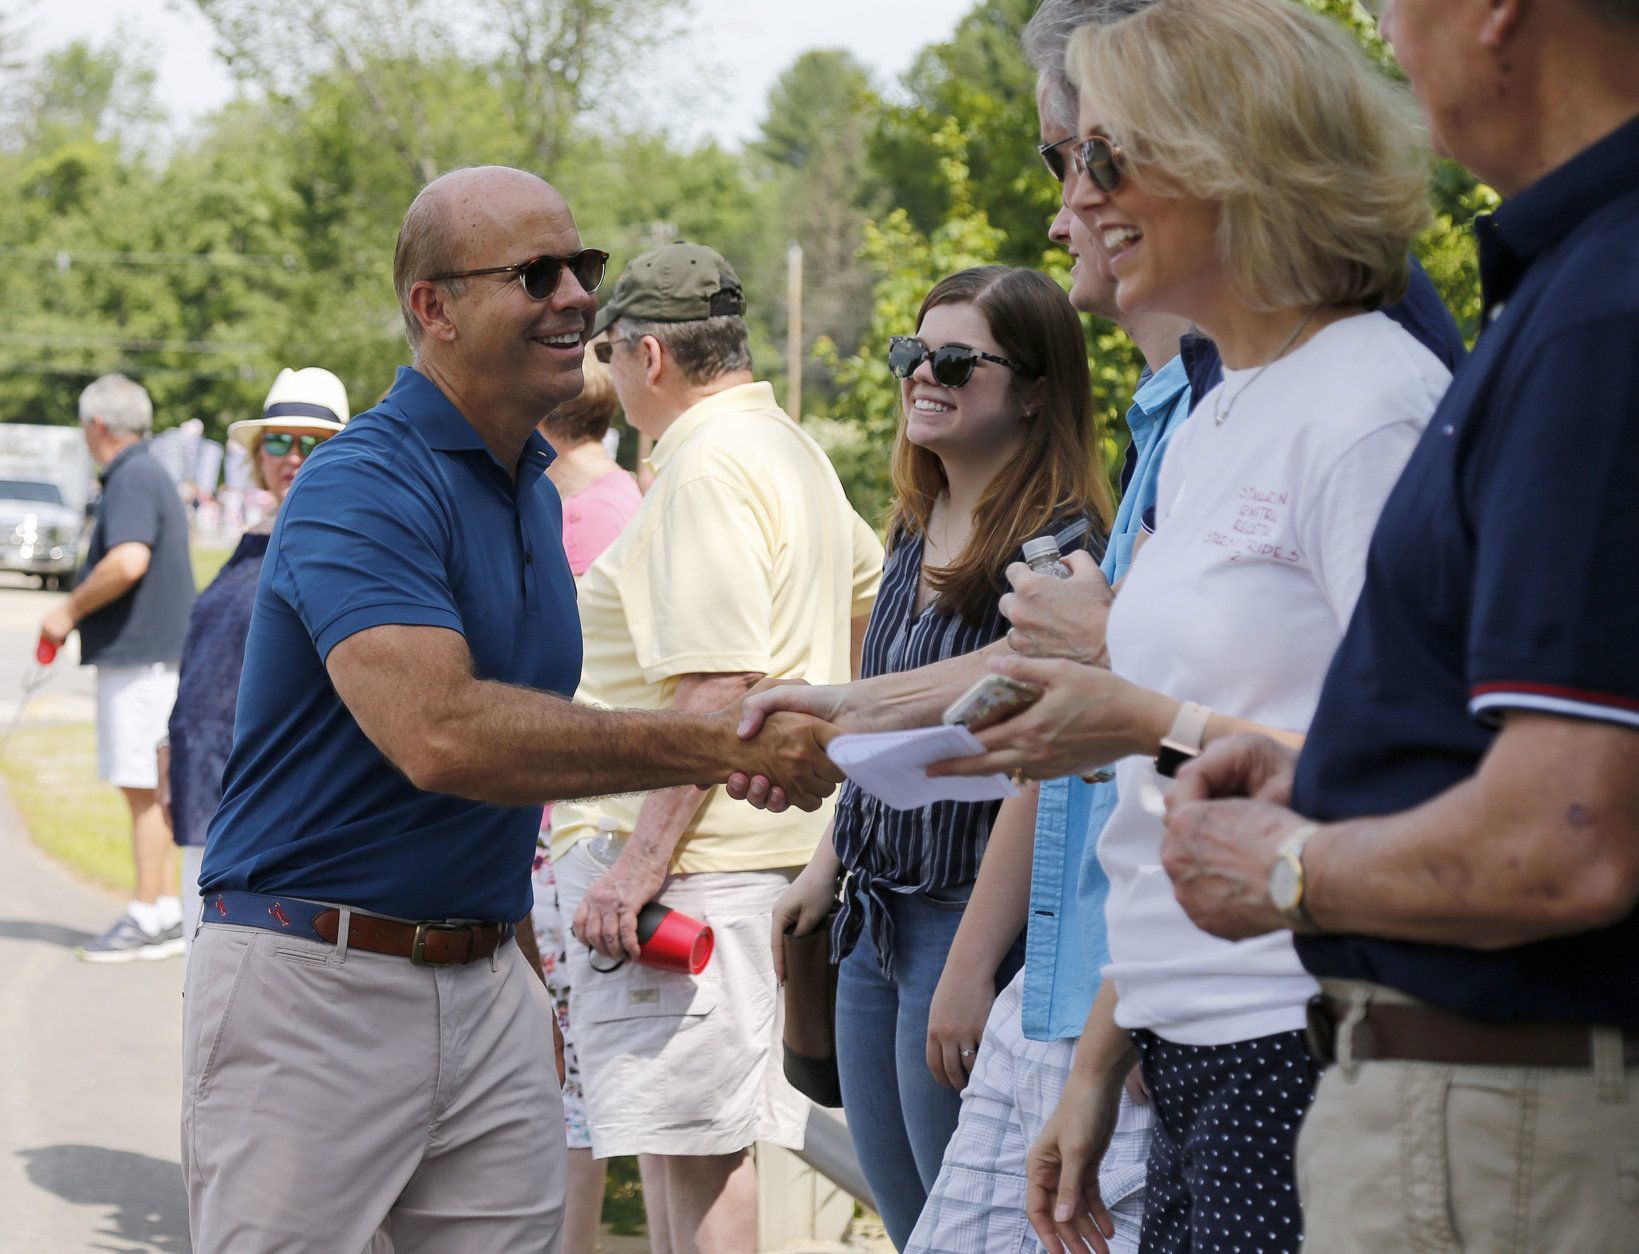 Democratic presidential candidate former U.S. Rep. John Delaney, D-Md., shakes hands with potential supporters along the route during the Fourth of July Parade, Thursday, July 4, 2019, in Amherst. (AP Photo/Mary Schwalm)